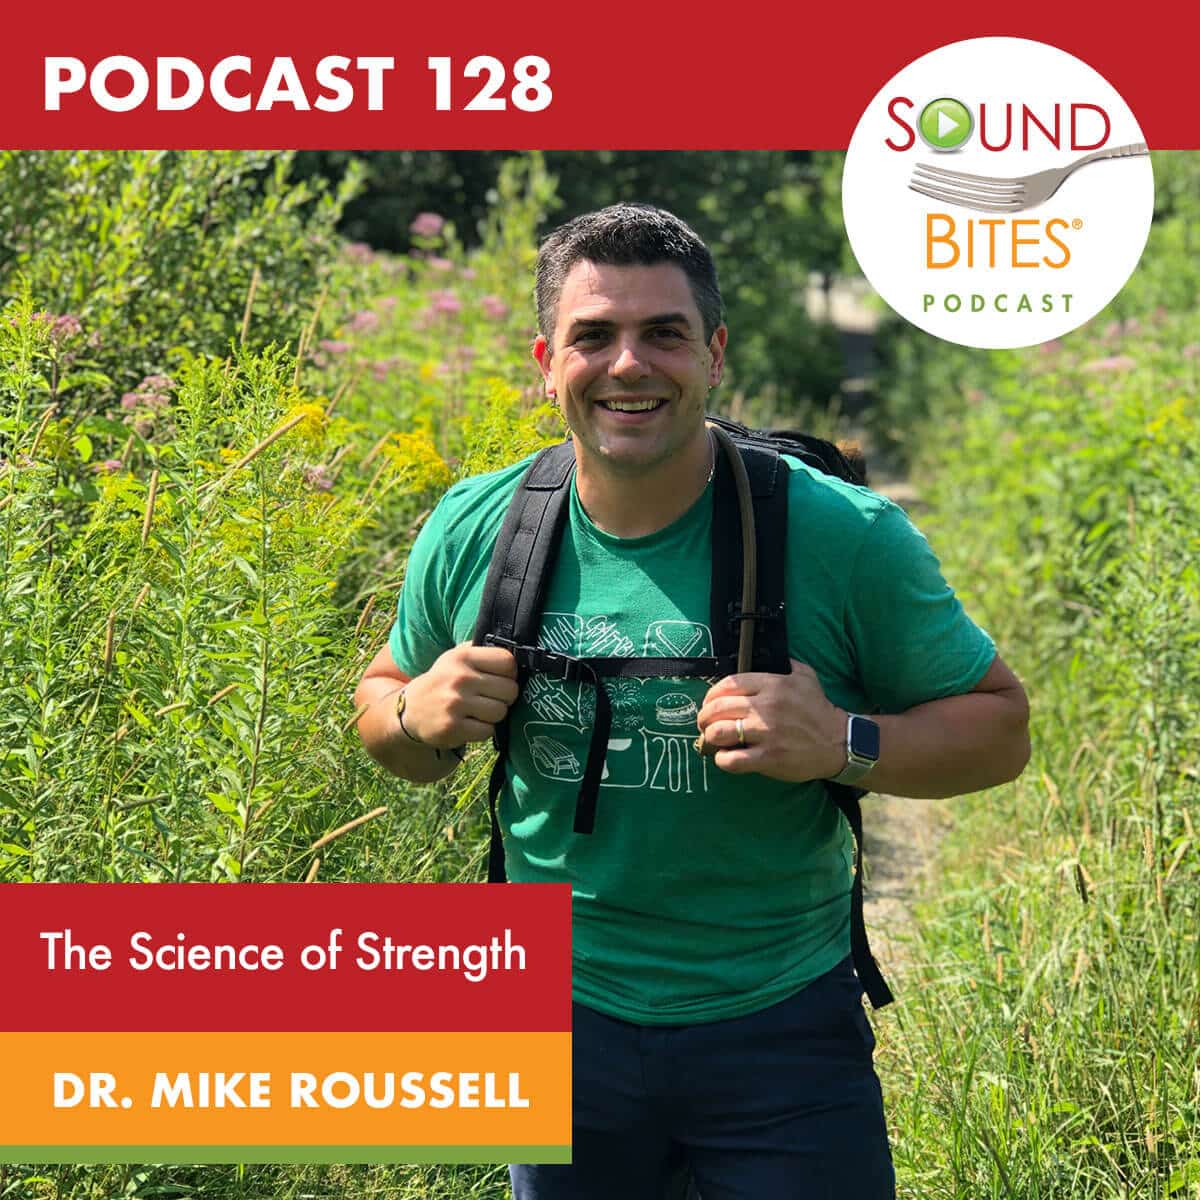 Sound Bites Podcast: Episode 128 The Science of Strength – Dr. Mike Roussell